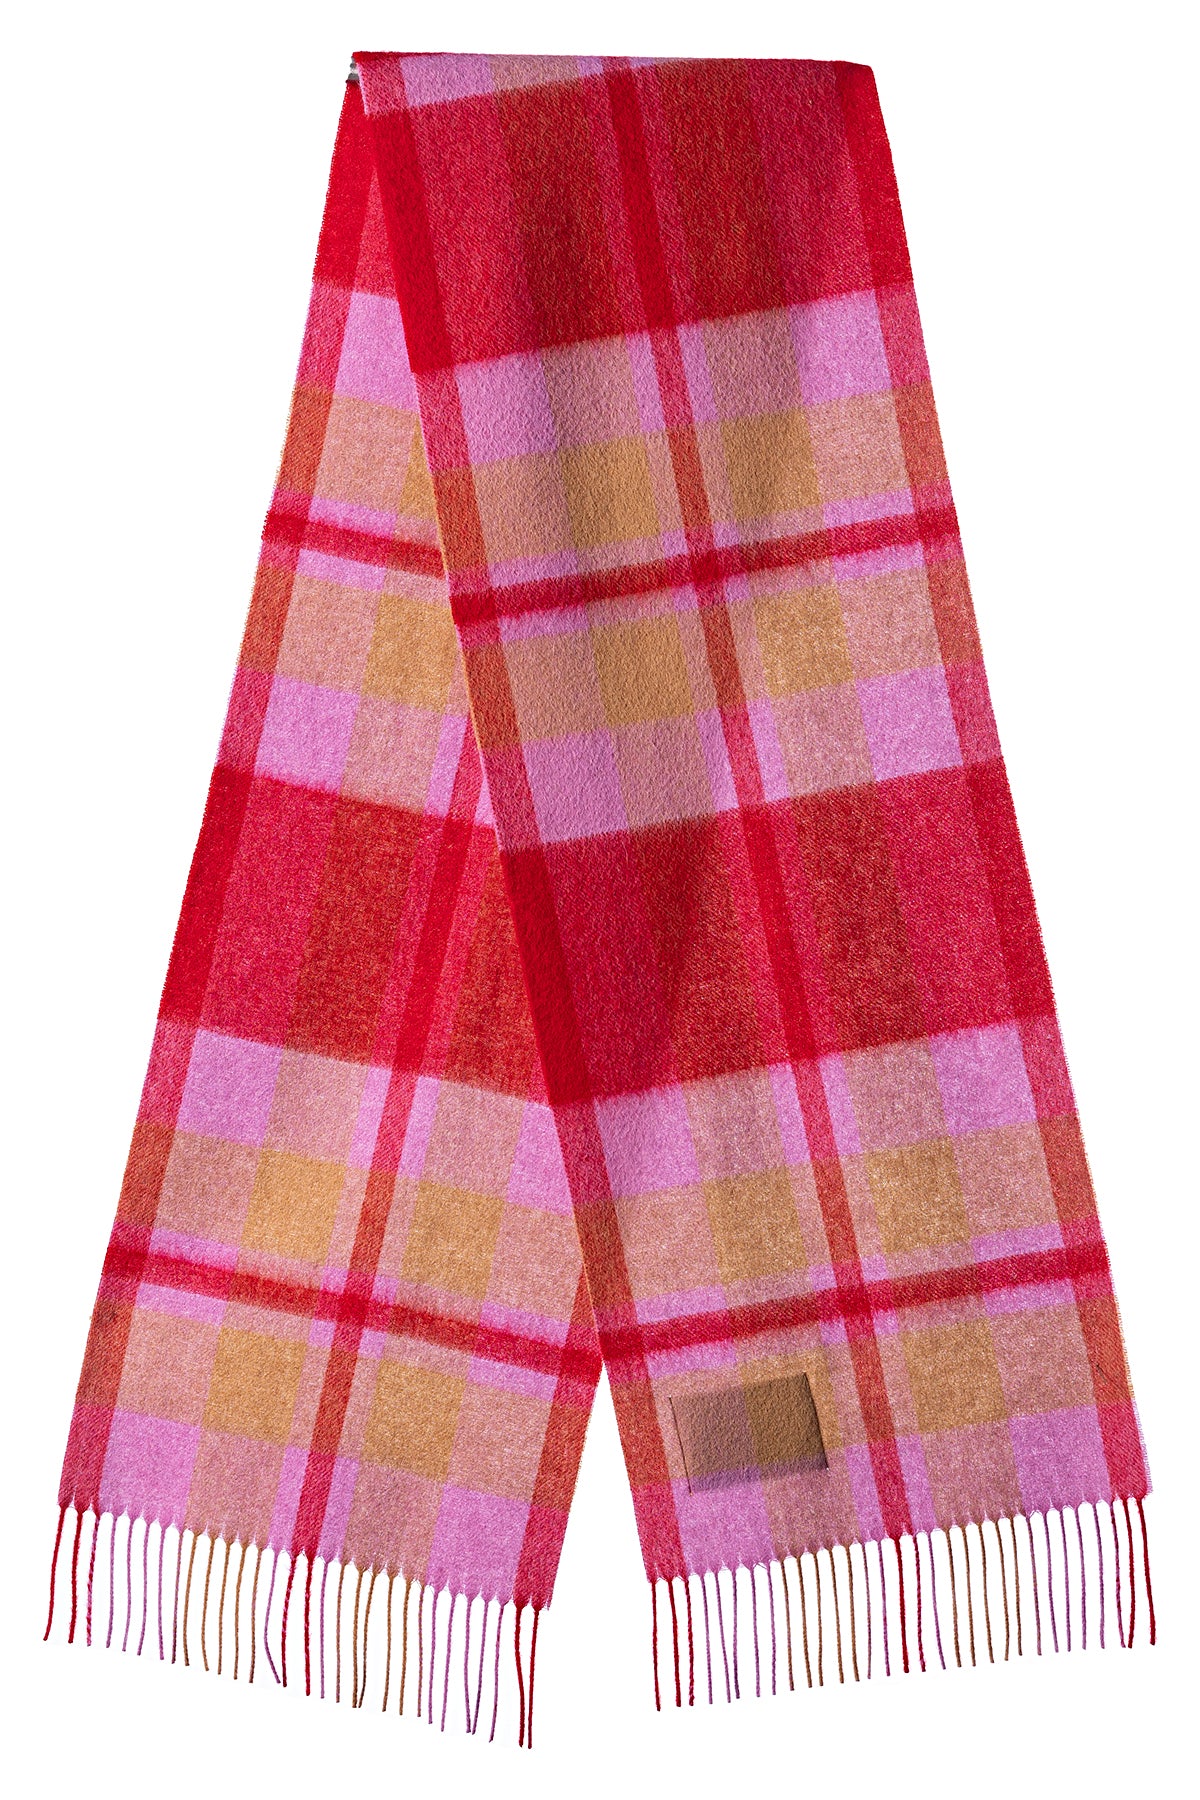 100% Pure Lambswool Scarf DC Scott Red/Blue